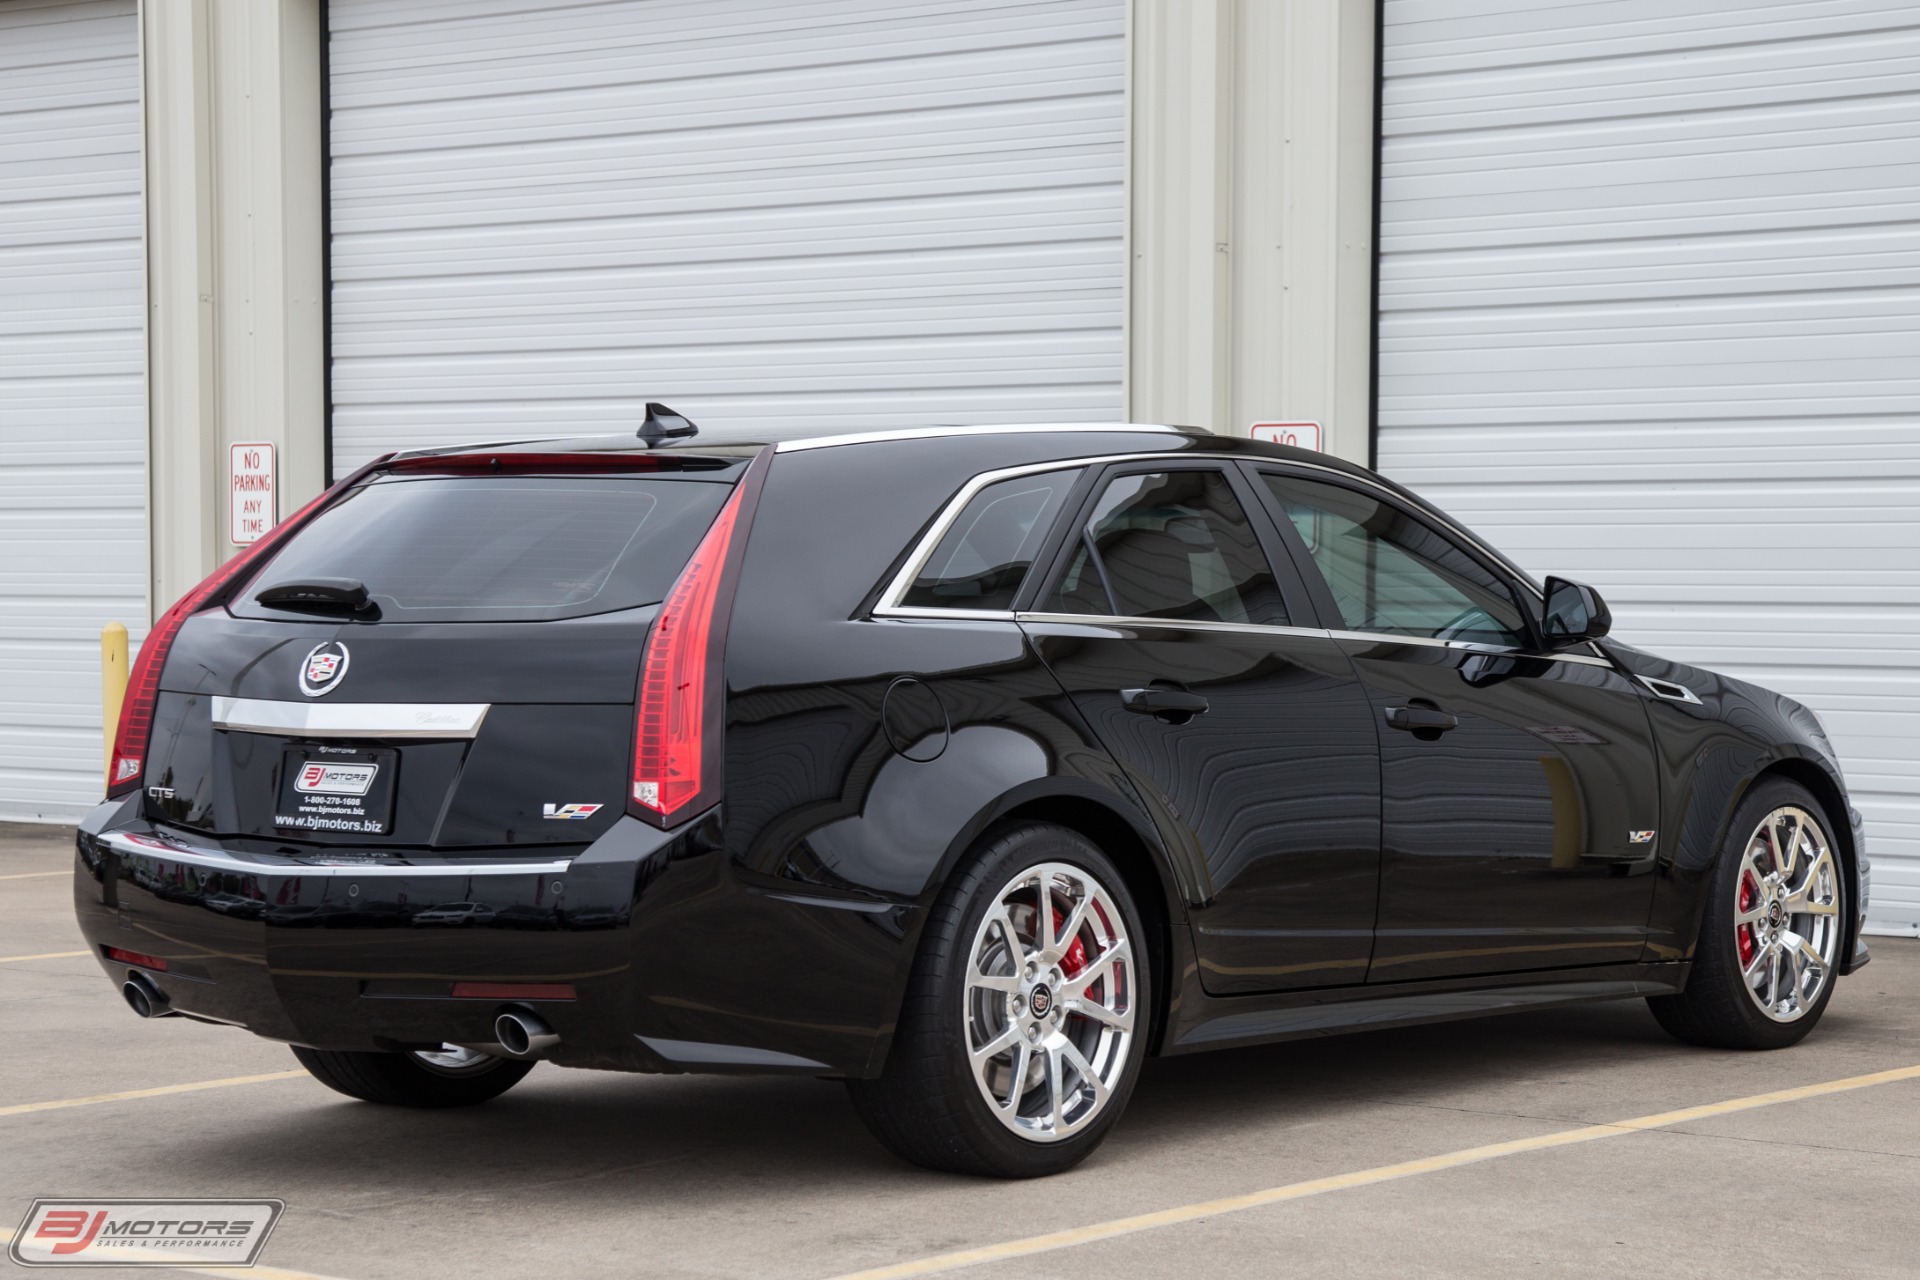 Used-2014-Cadillac-CTS-V-Wagon-HPE700-Package